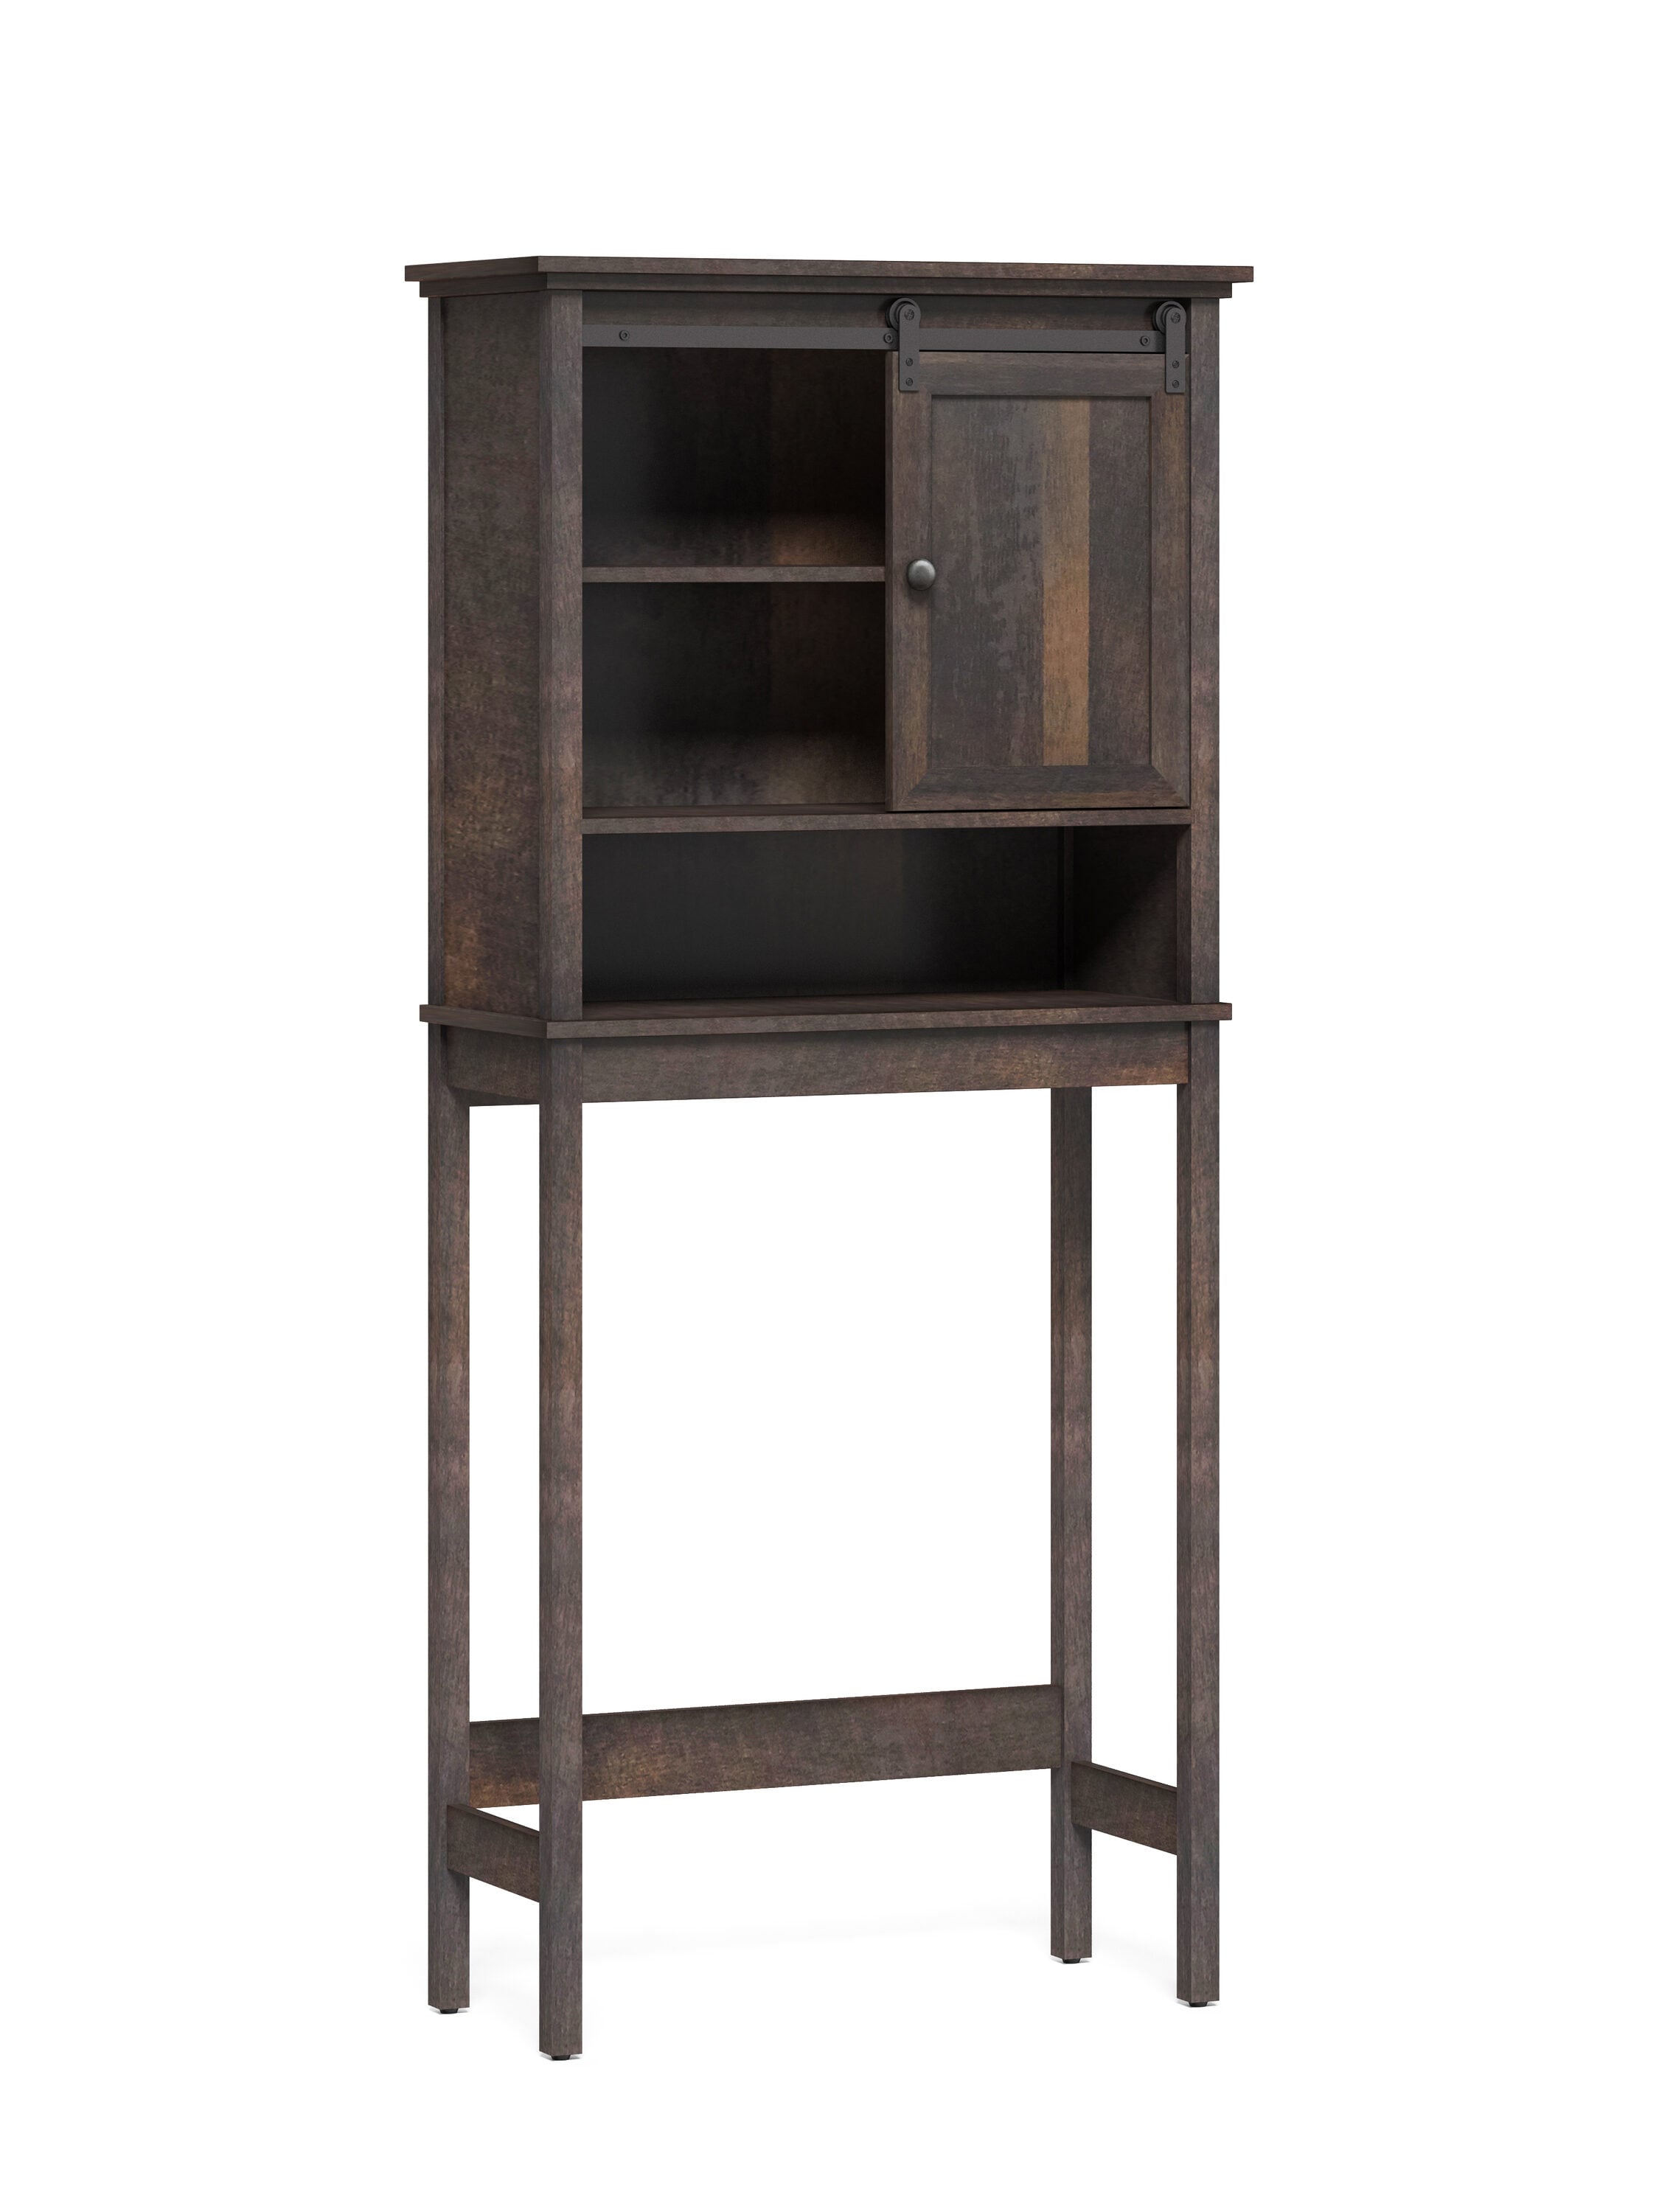 New Ridge Home Goods Dunnsville 2 Tier Space Saver with Side Storage Antique Chestnut